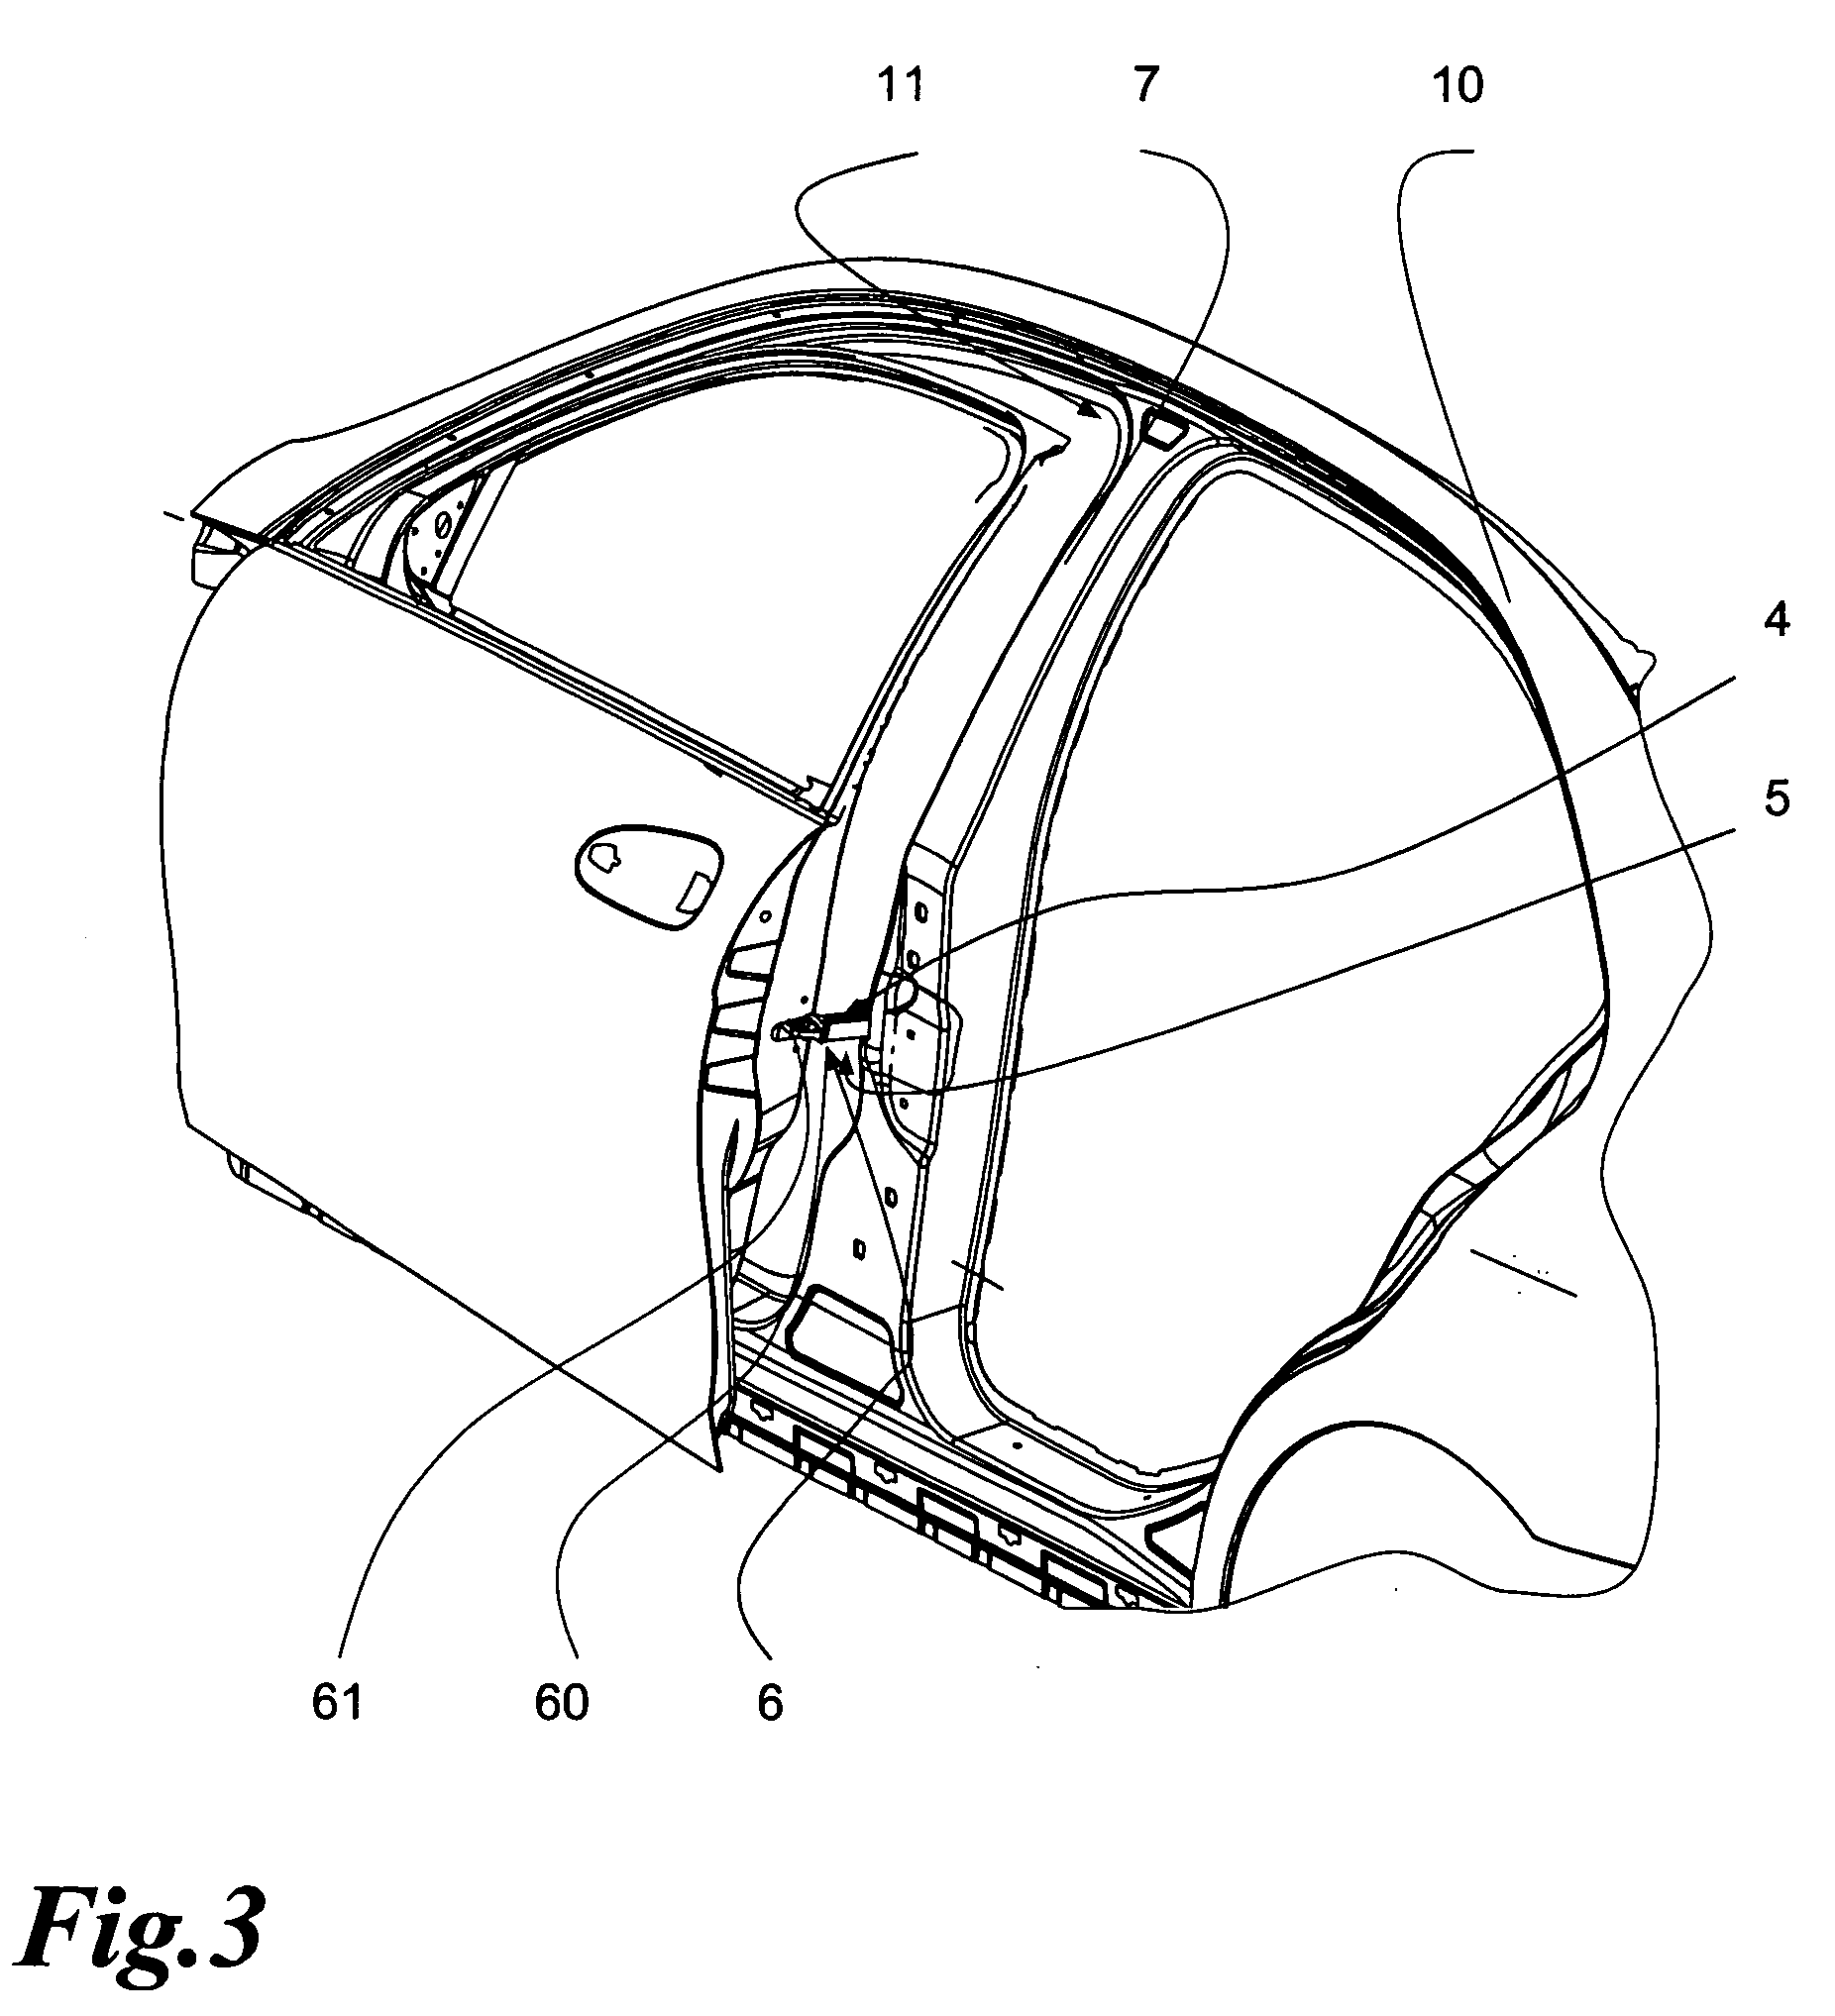 Device for side impact protection